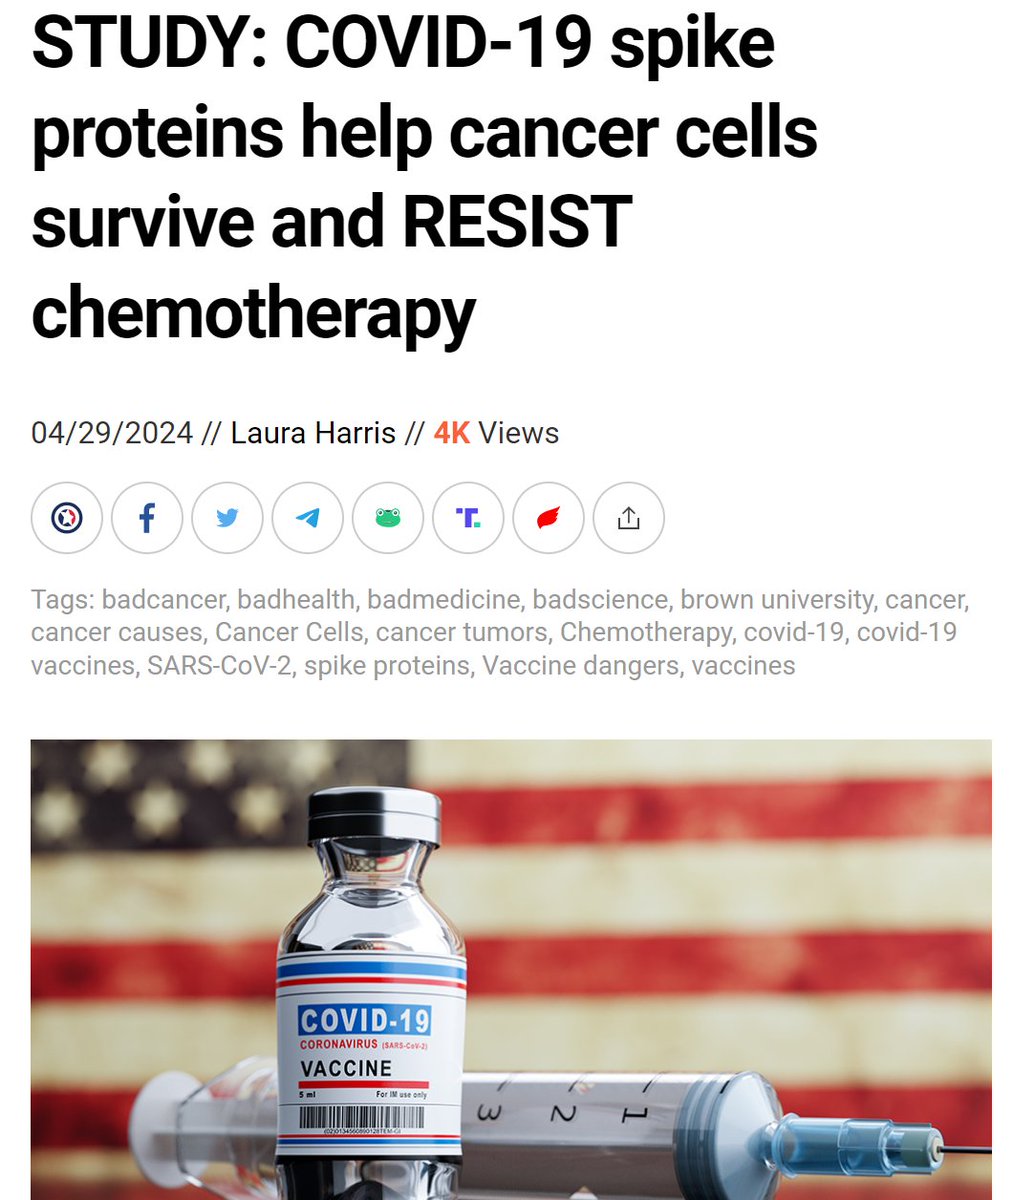 A new preprint cell study from Brown University has found that the spike protein from SARS-CoV-2, the virus responsible for the Wuhan coronavirus (COVID-19), helps cancer cells survive and resist chemotherapy. According to the study, led by Dr. Wafik El-Deiry, the director of